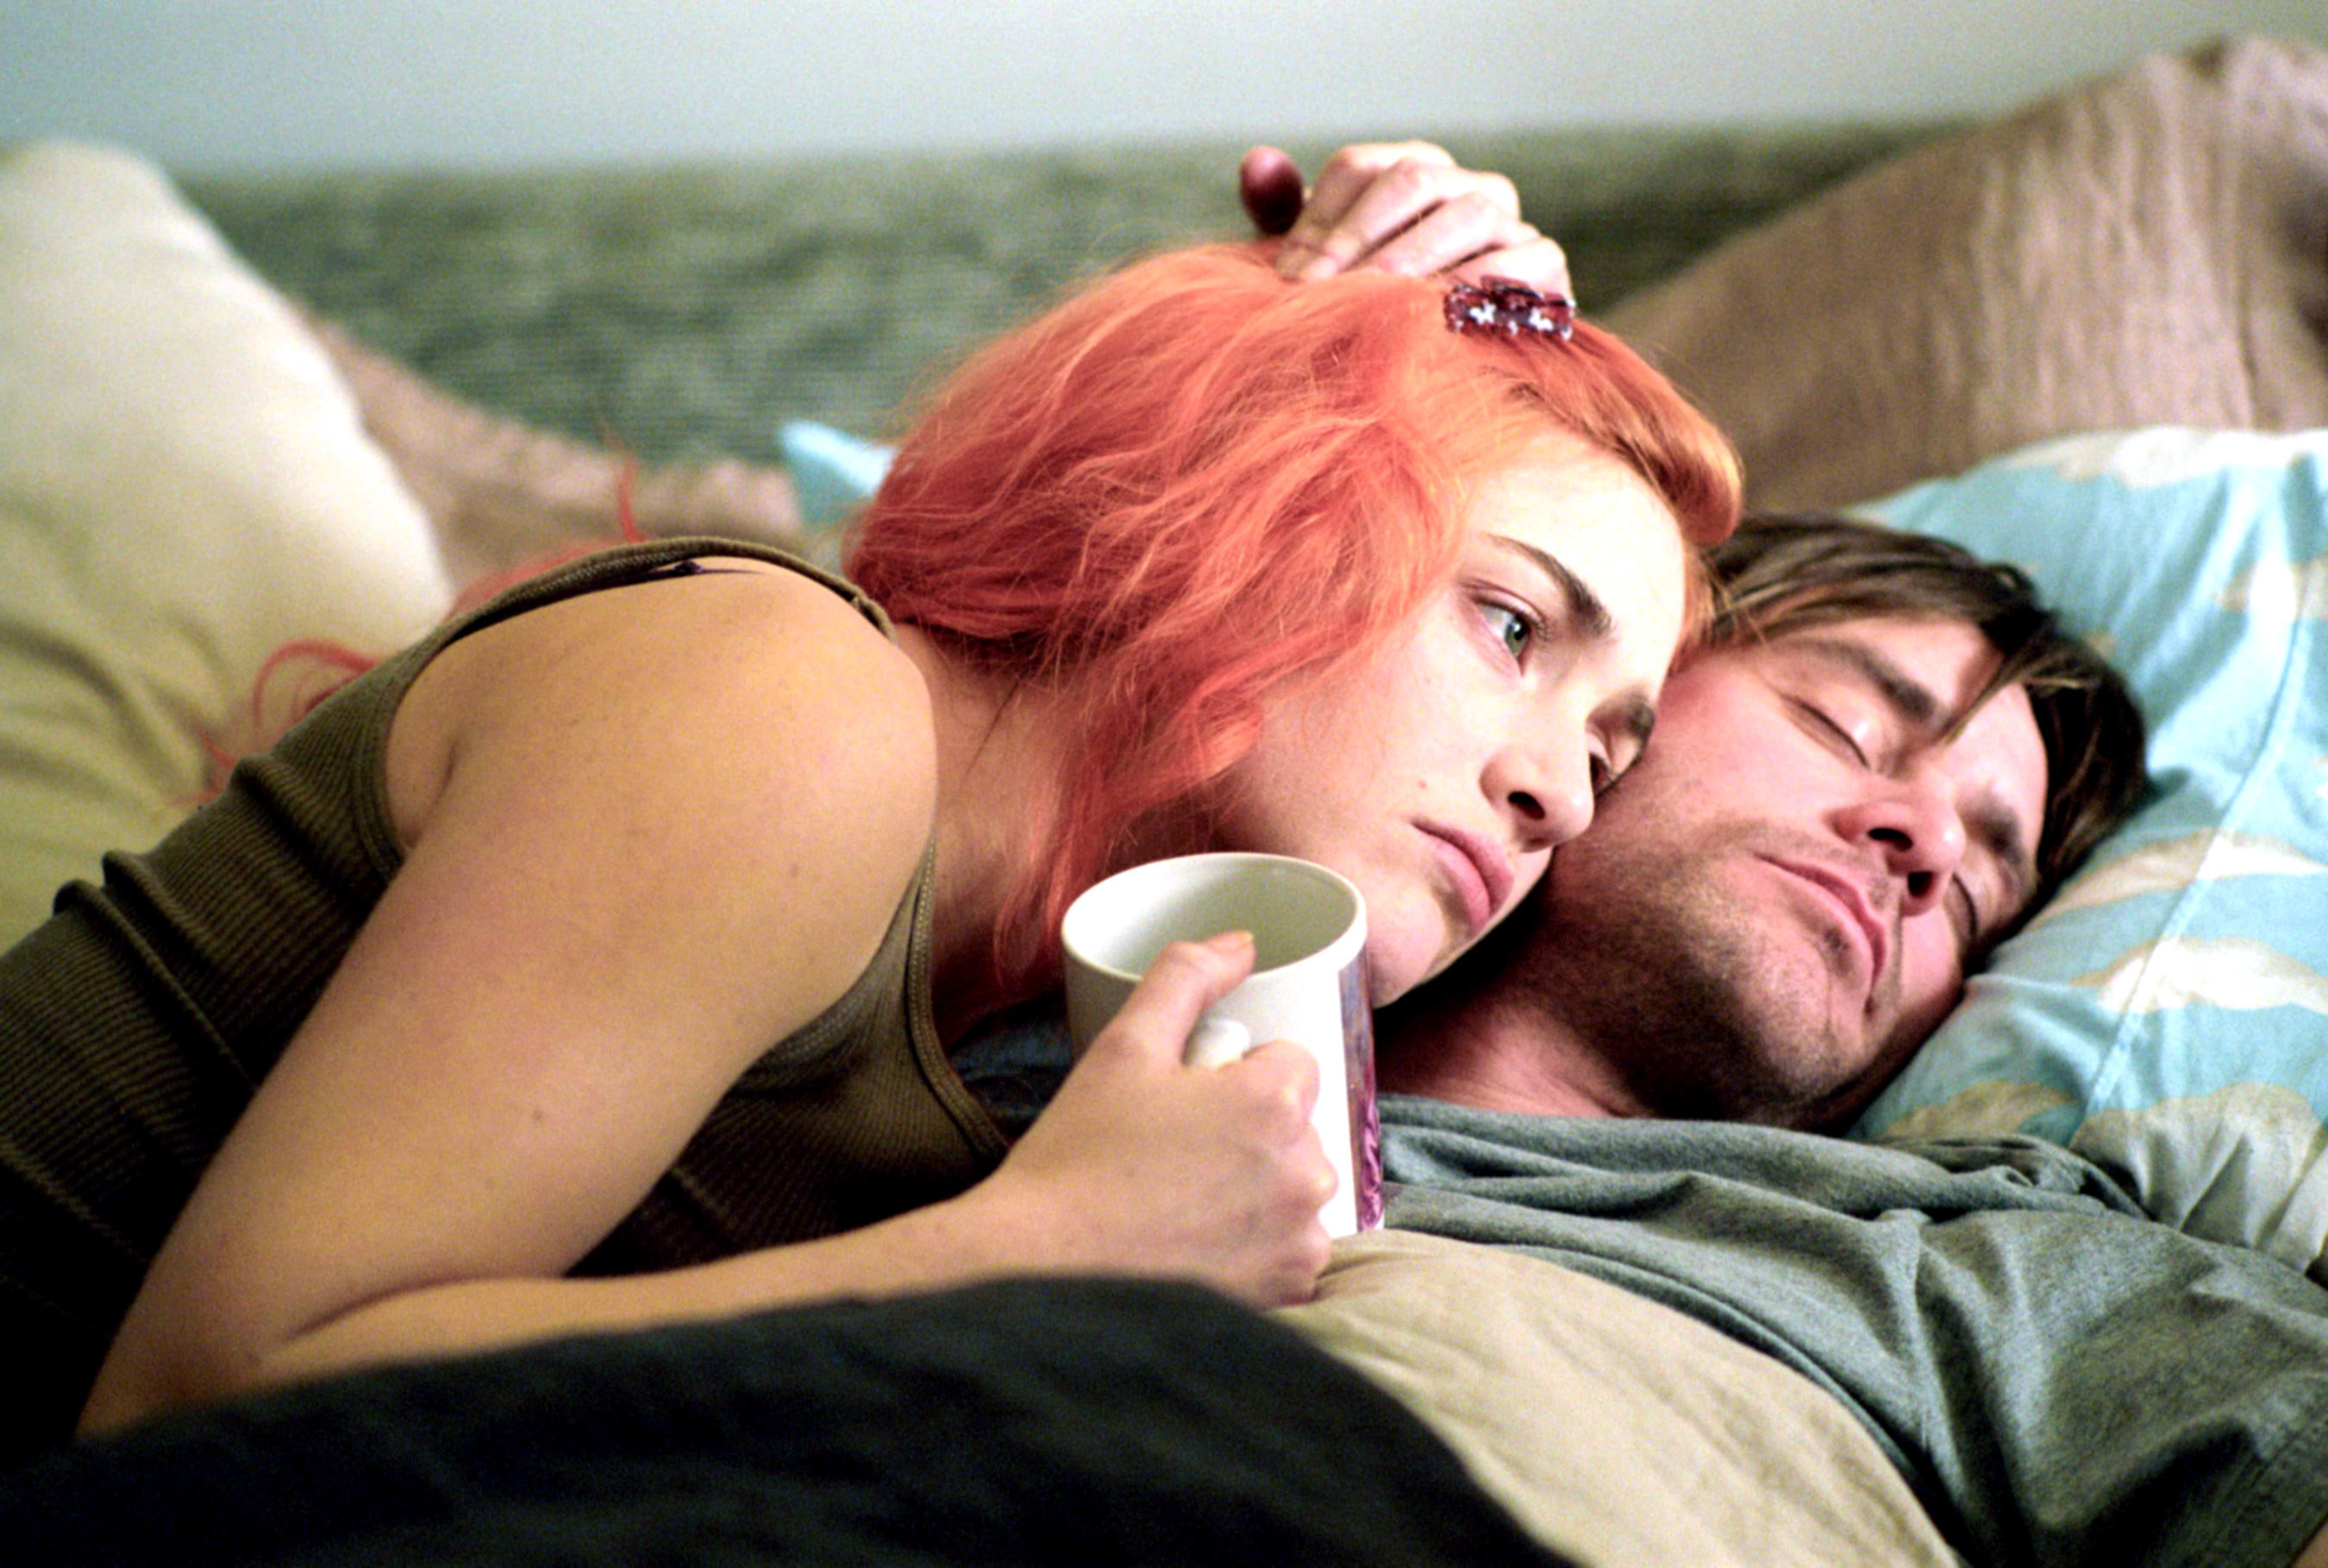 Kate Winslet with dyed peach colored hair, holding a mug, lying on Jim Carrey&#x27;s chest, as he sleeps in bed